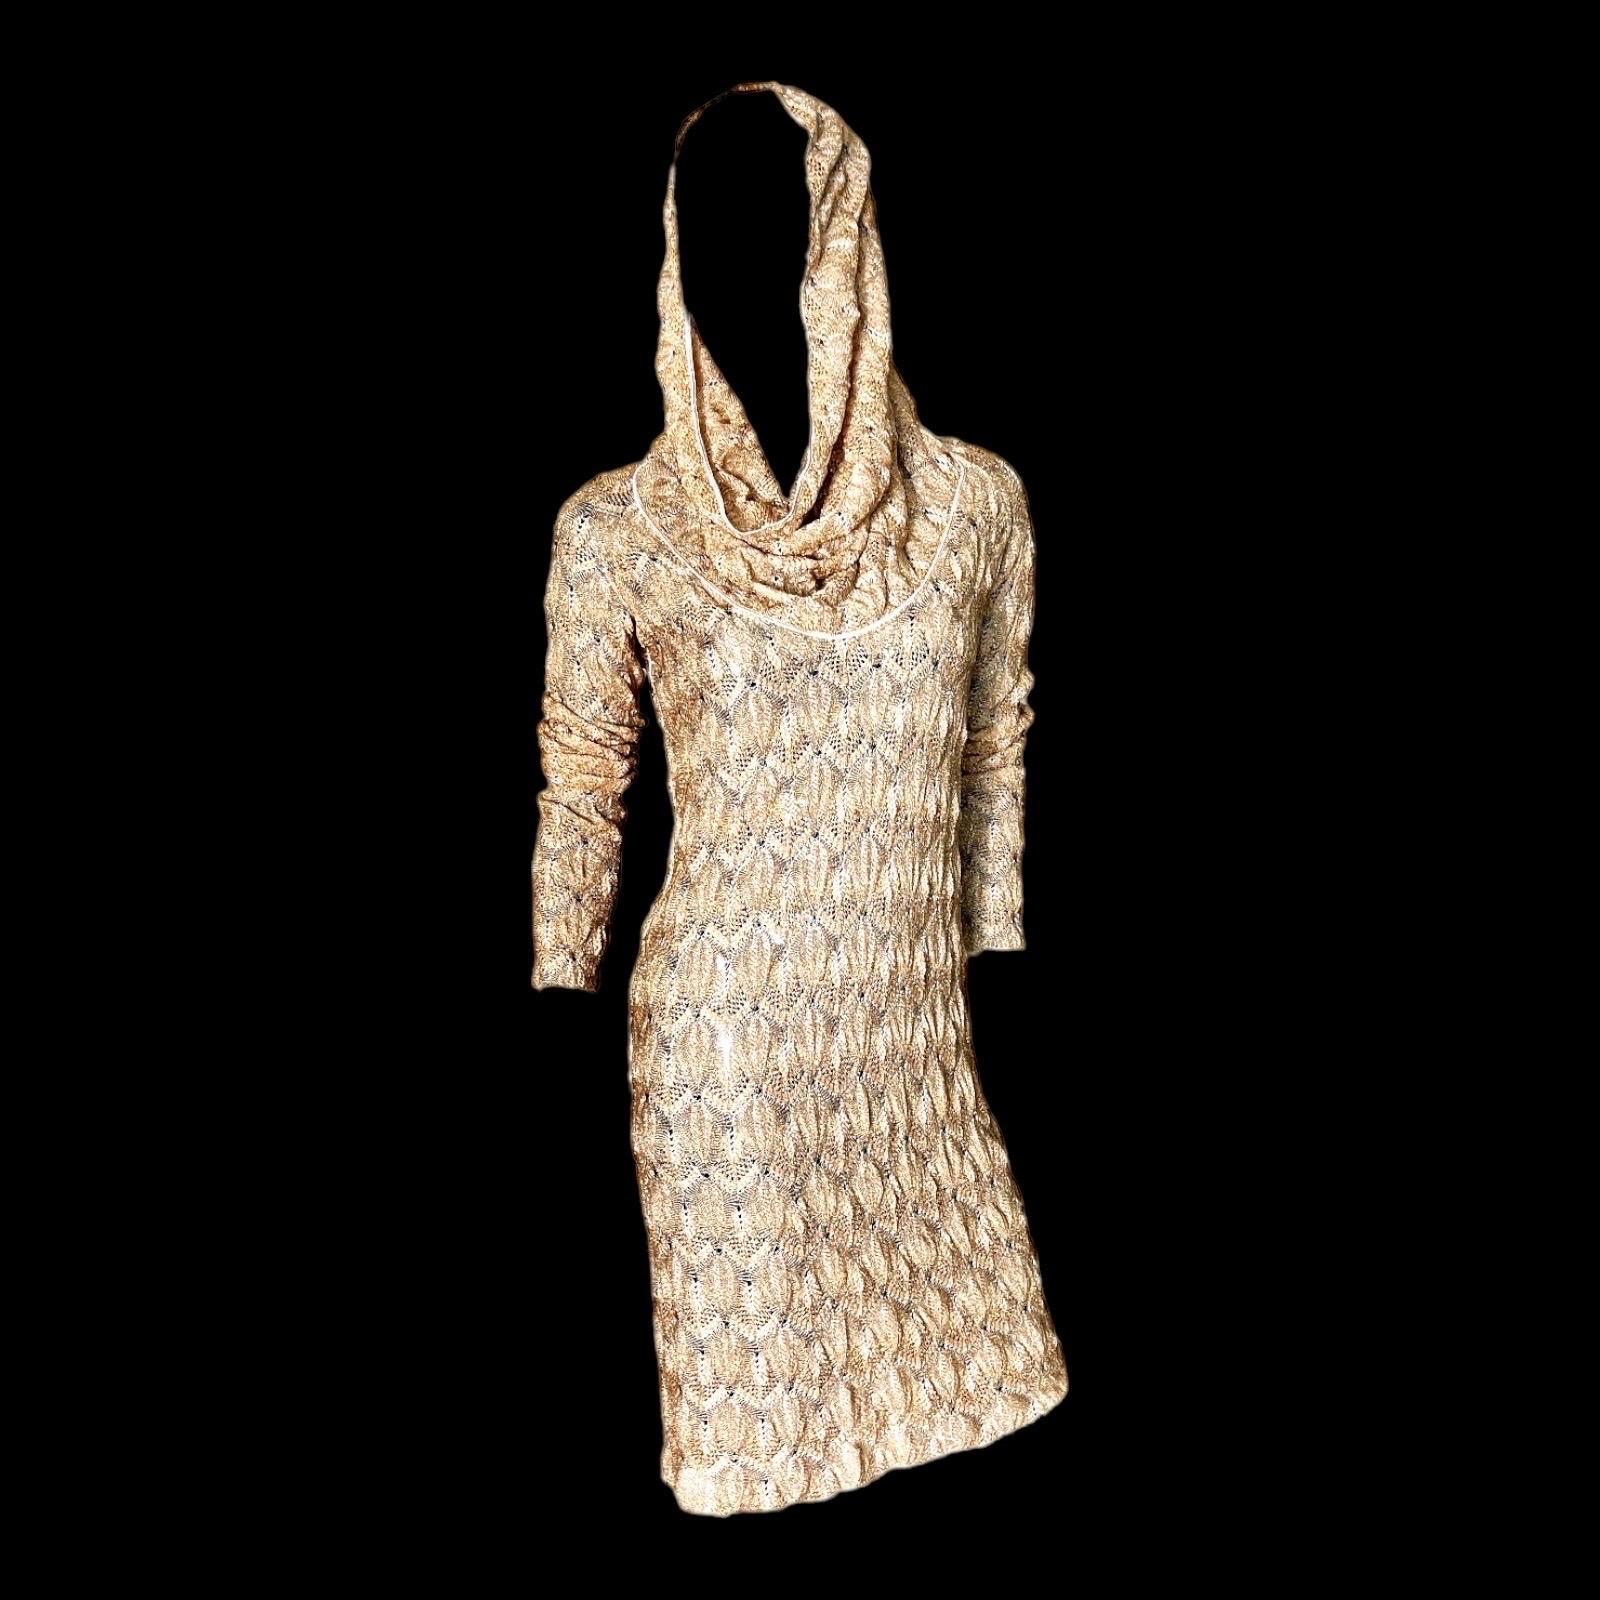 UNIQUE & LUXURIOUS
METALLIC GOLD LUREX DRESS
RARE & SPECIAL PIECE

DETAILS:

    Beautiful gold lurex MISSONI dress 
From MISSONI main line
    Classic MISSONI signature knit
    Simply slips on
Hooded detail, can also worn with draped neckline